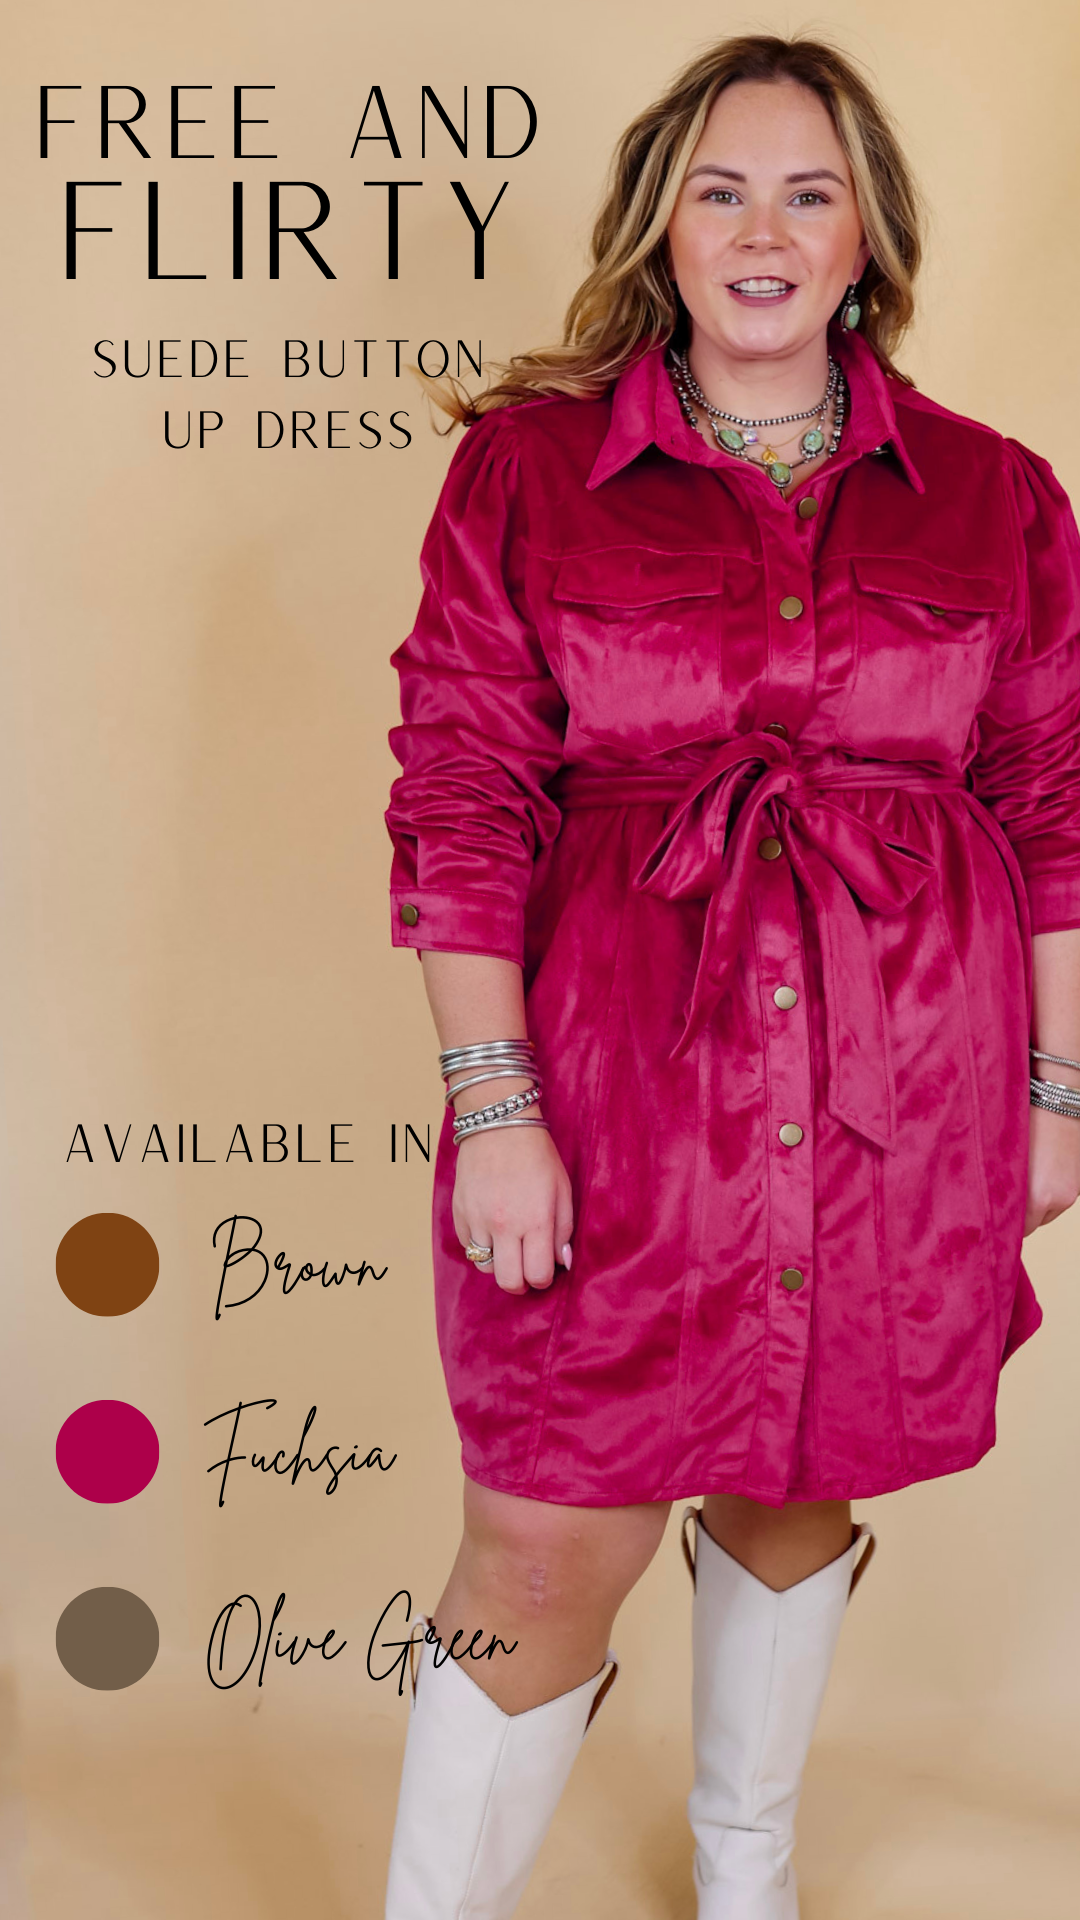 Free And Flirty Suede Button Up Dress with Waist Tie in Fuchsia Pink - Giddy Up Glamour Boutique